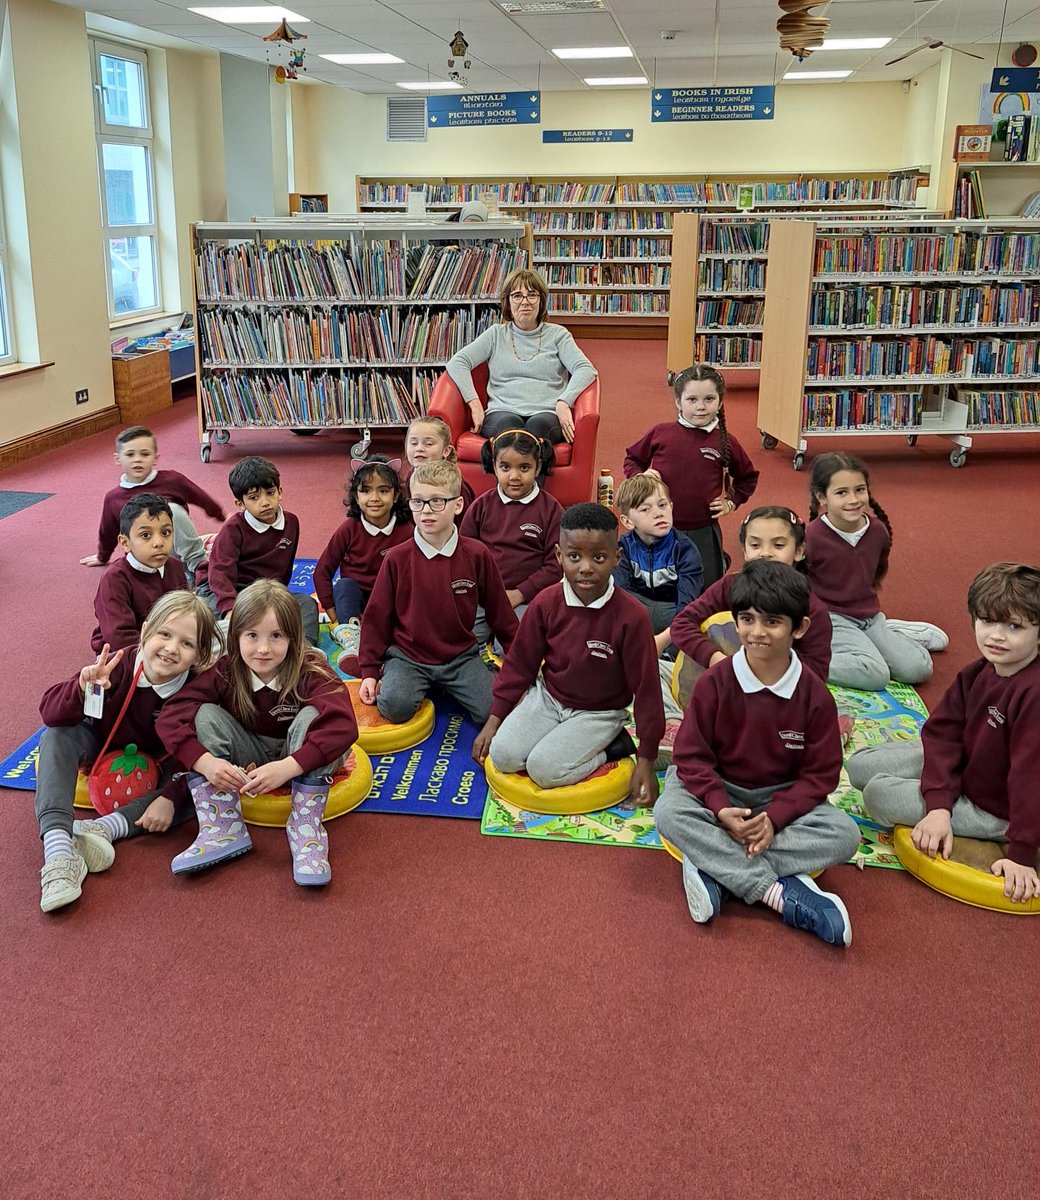 Senior Infants pupils from Scoil Chroi Iosa really enjoyed their storytime with Laura today! Thanks for visiting us!
#storytime #classvisit #atyourlibrary